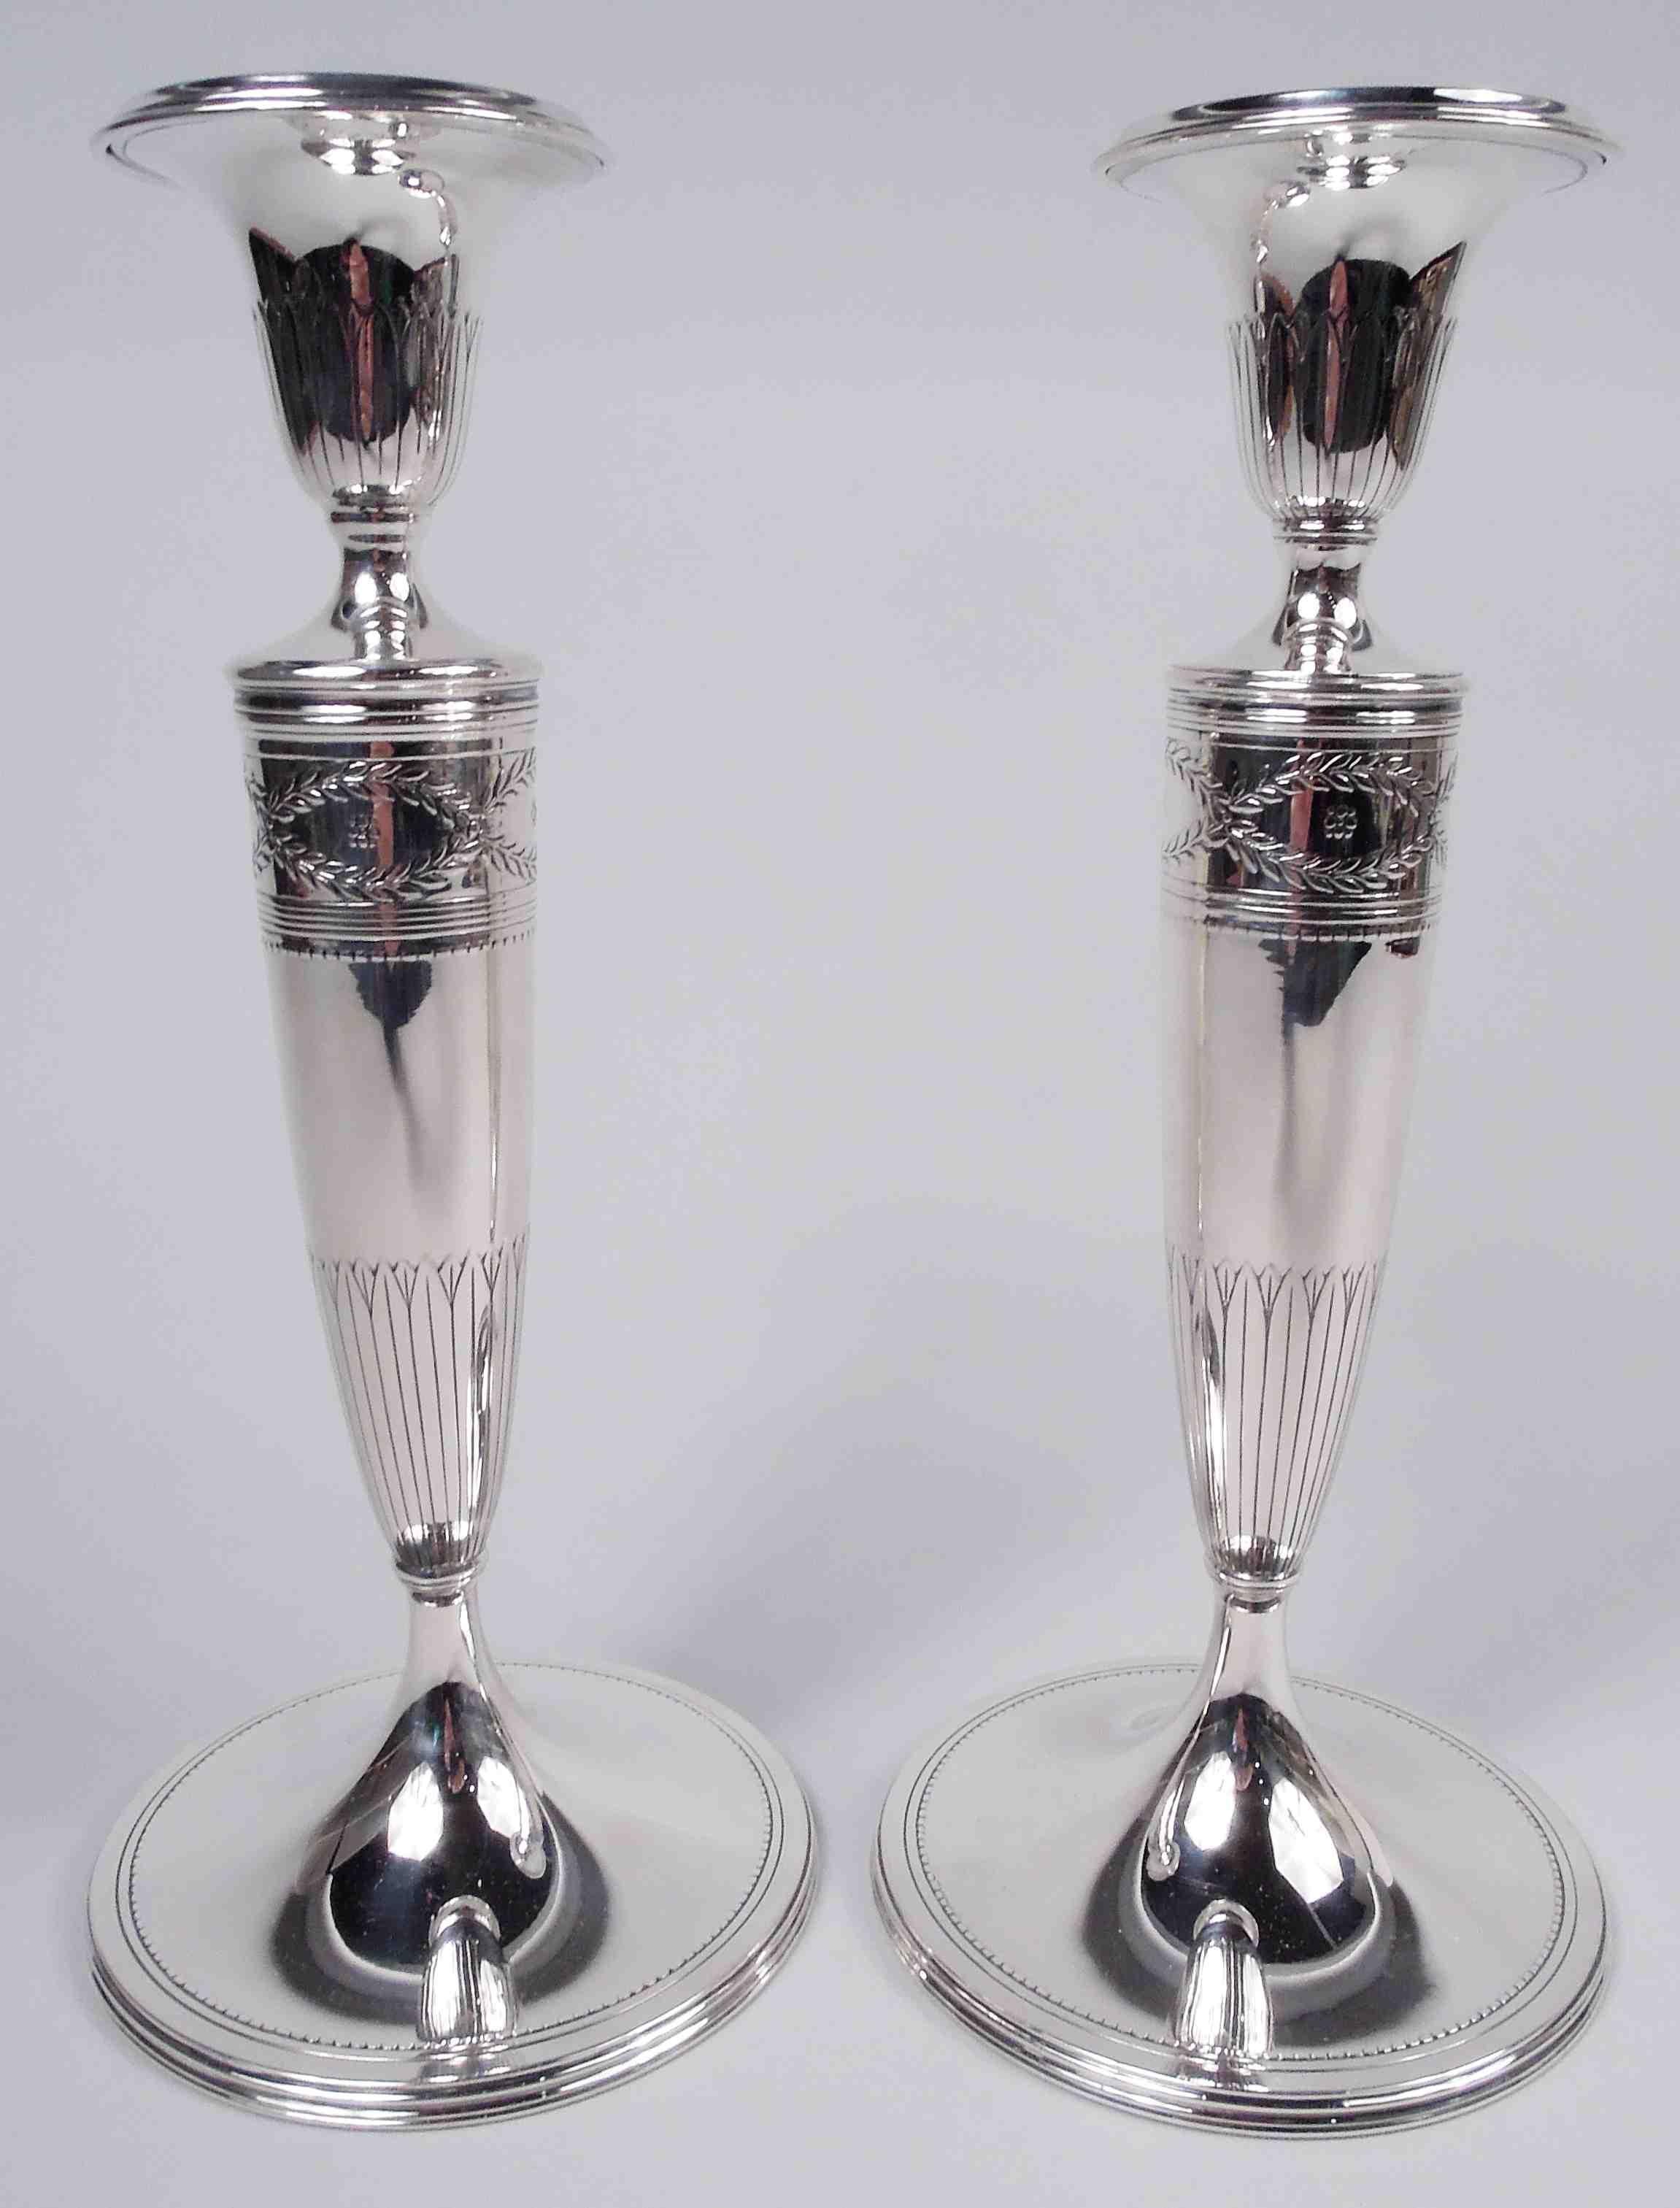 Pair of Winthrop sterling silver candlesticks. Made by Tiffany & Co. in New York, ca 1911. Each: Tapering columnar shaft on raised foot. Acid-etched ornament. Urn socket with detachable bobeche. Shaft top has the classic laurel-wreath border inset